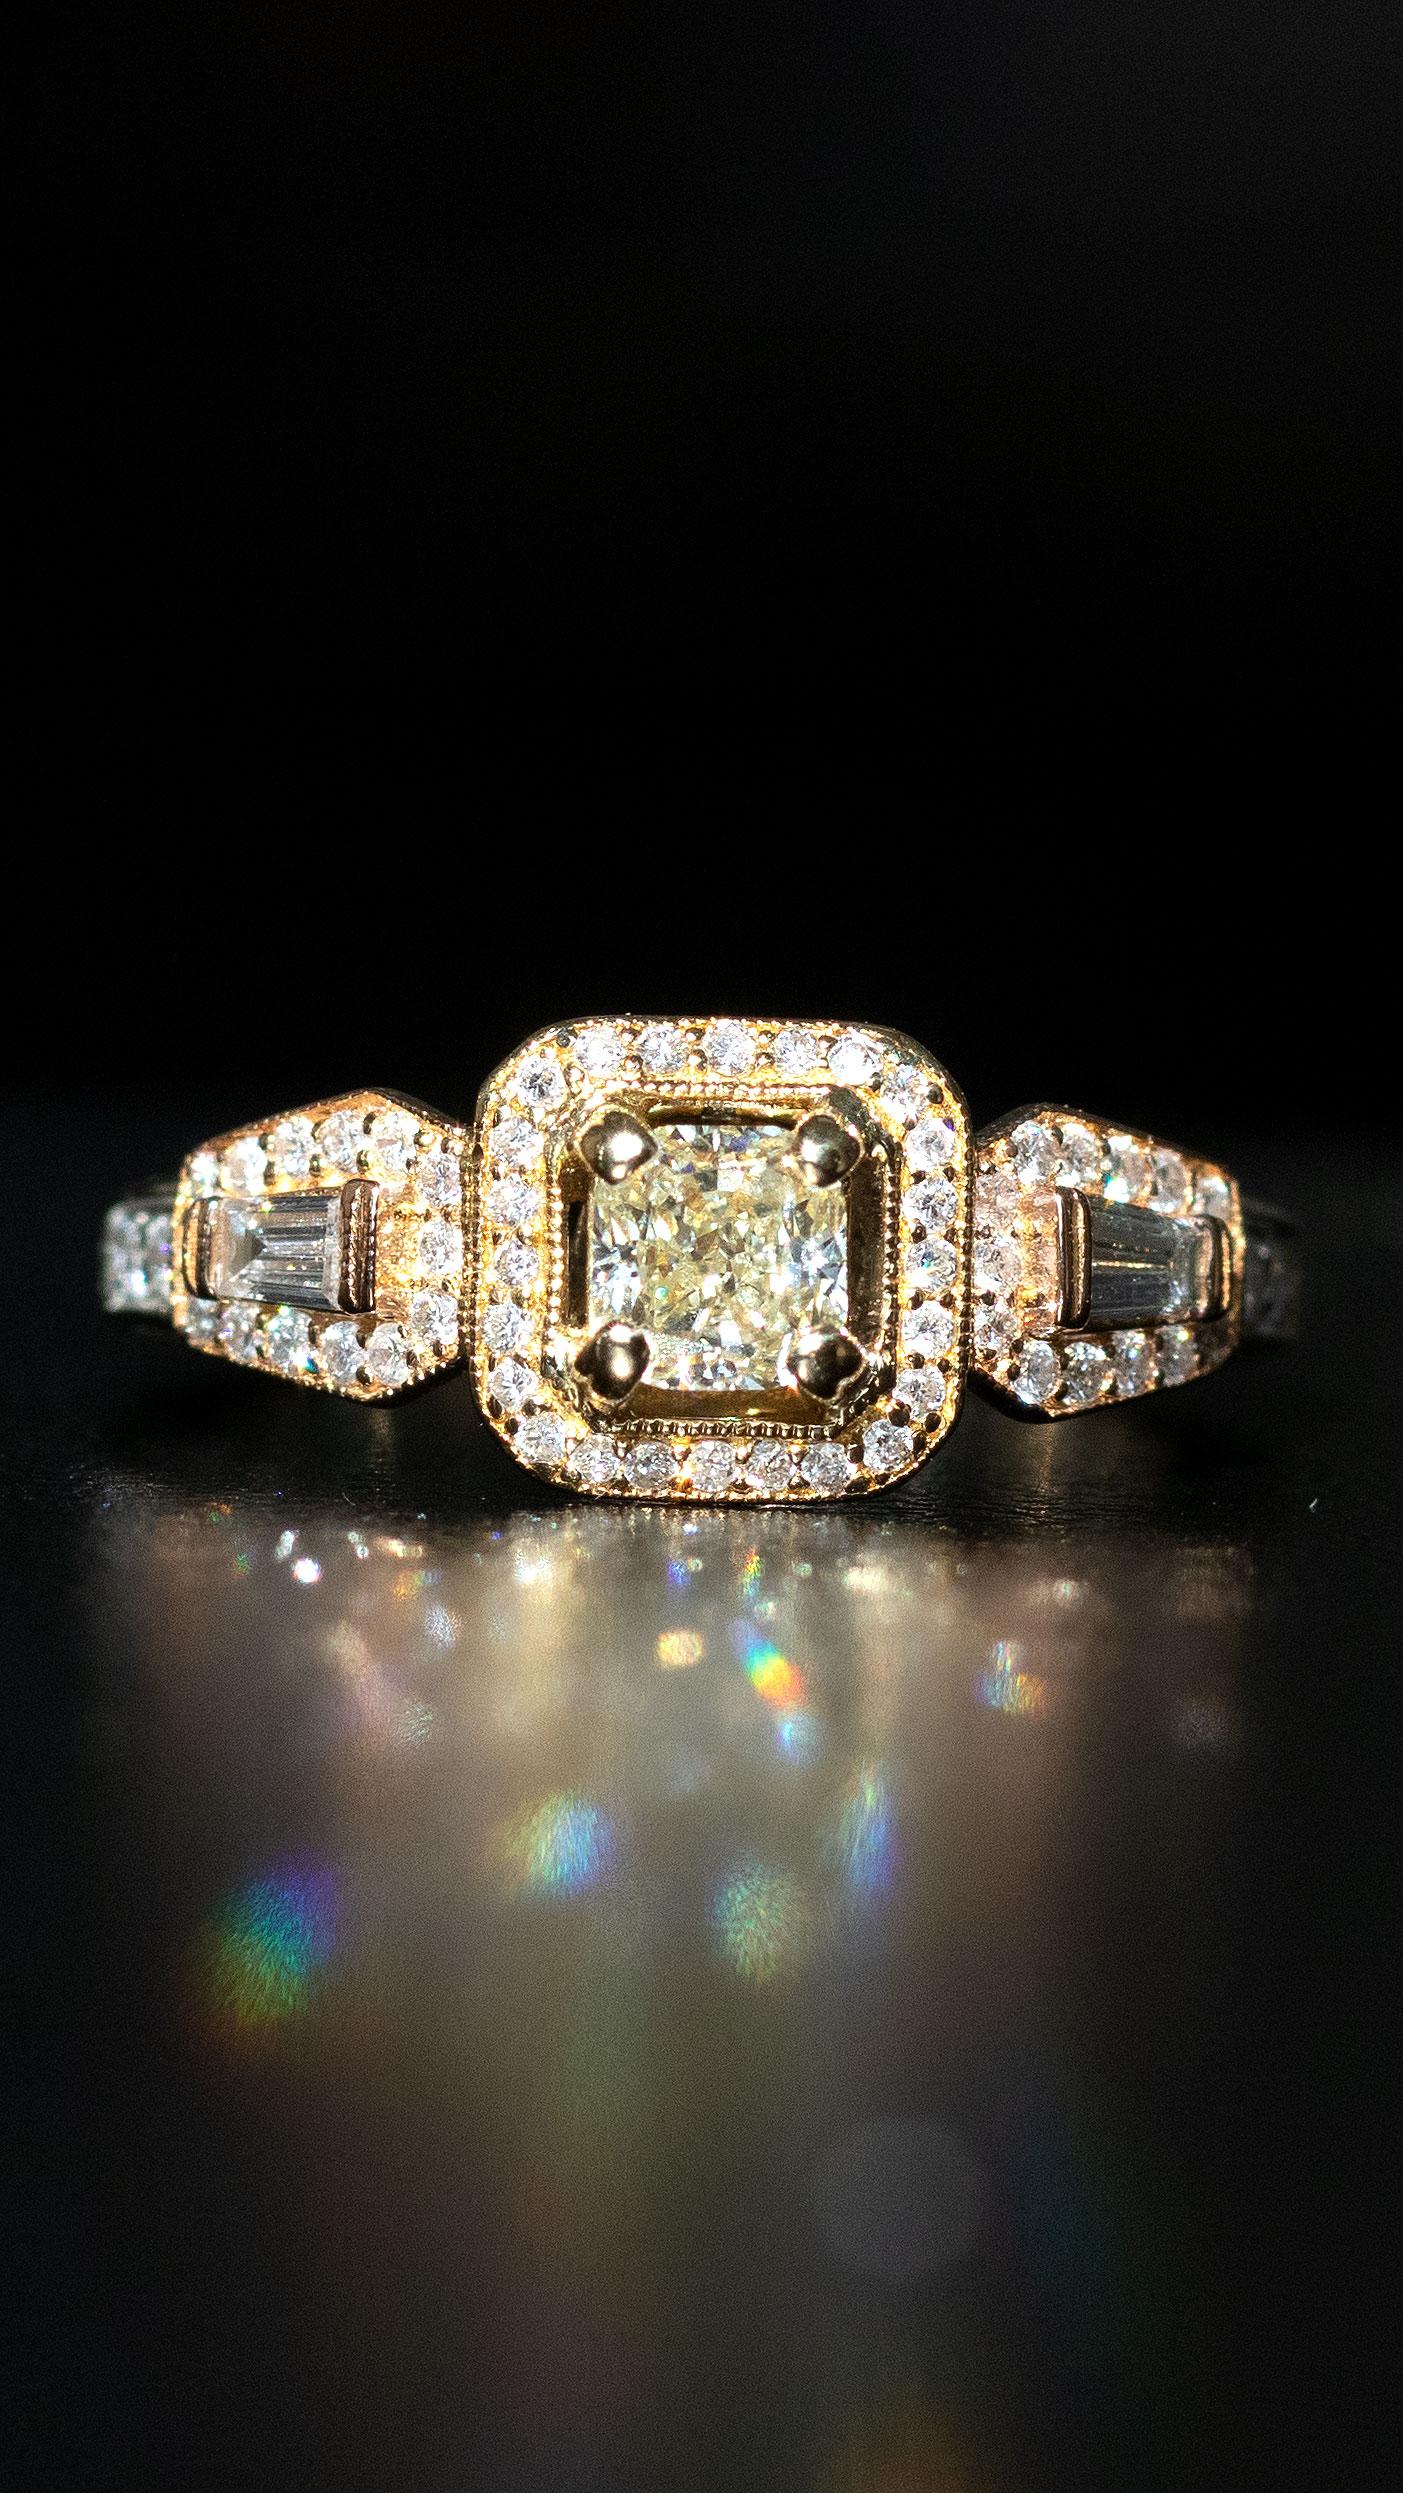 18k Tri Tone 1.50ctw Cushion Center Three Diamond Pave Ring

When it comes to capturing the essence of timeless elegance, the 18k Tri-Tone 1.50ctw Cushion Center Three Diamond Pave Ring truly stands out. This exquisite piece of jewelry is a